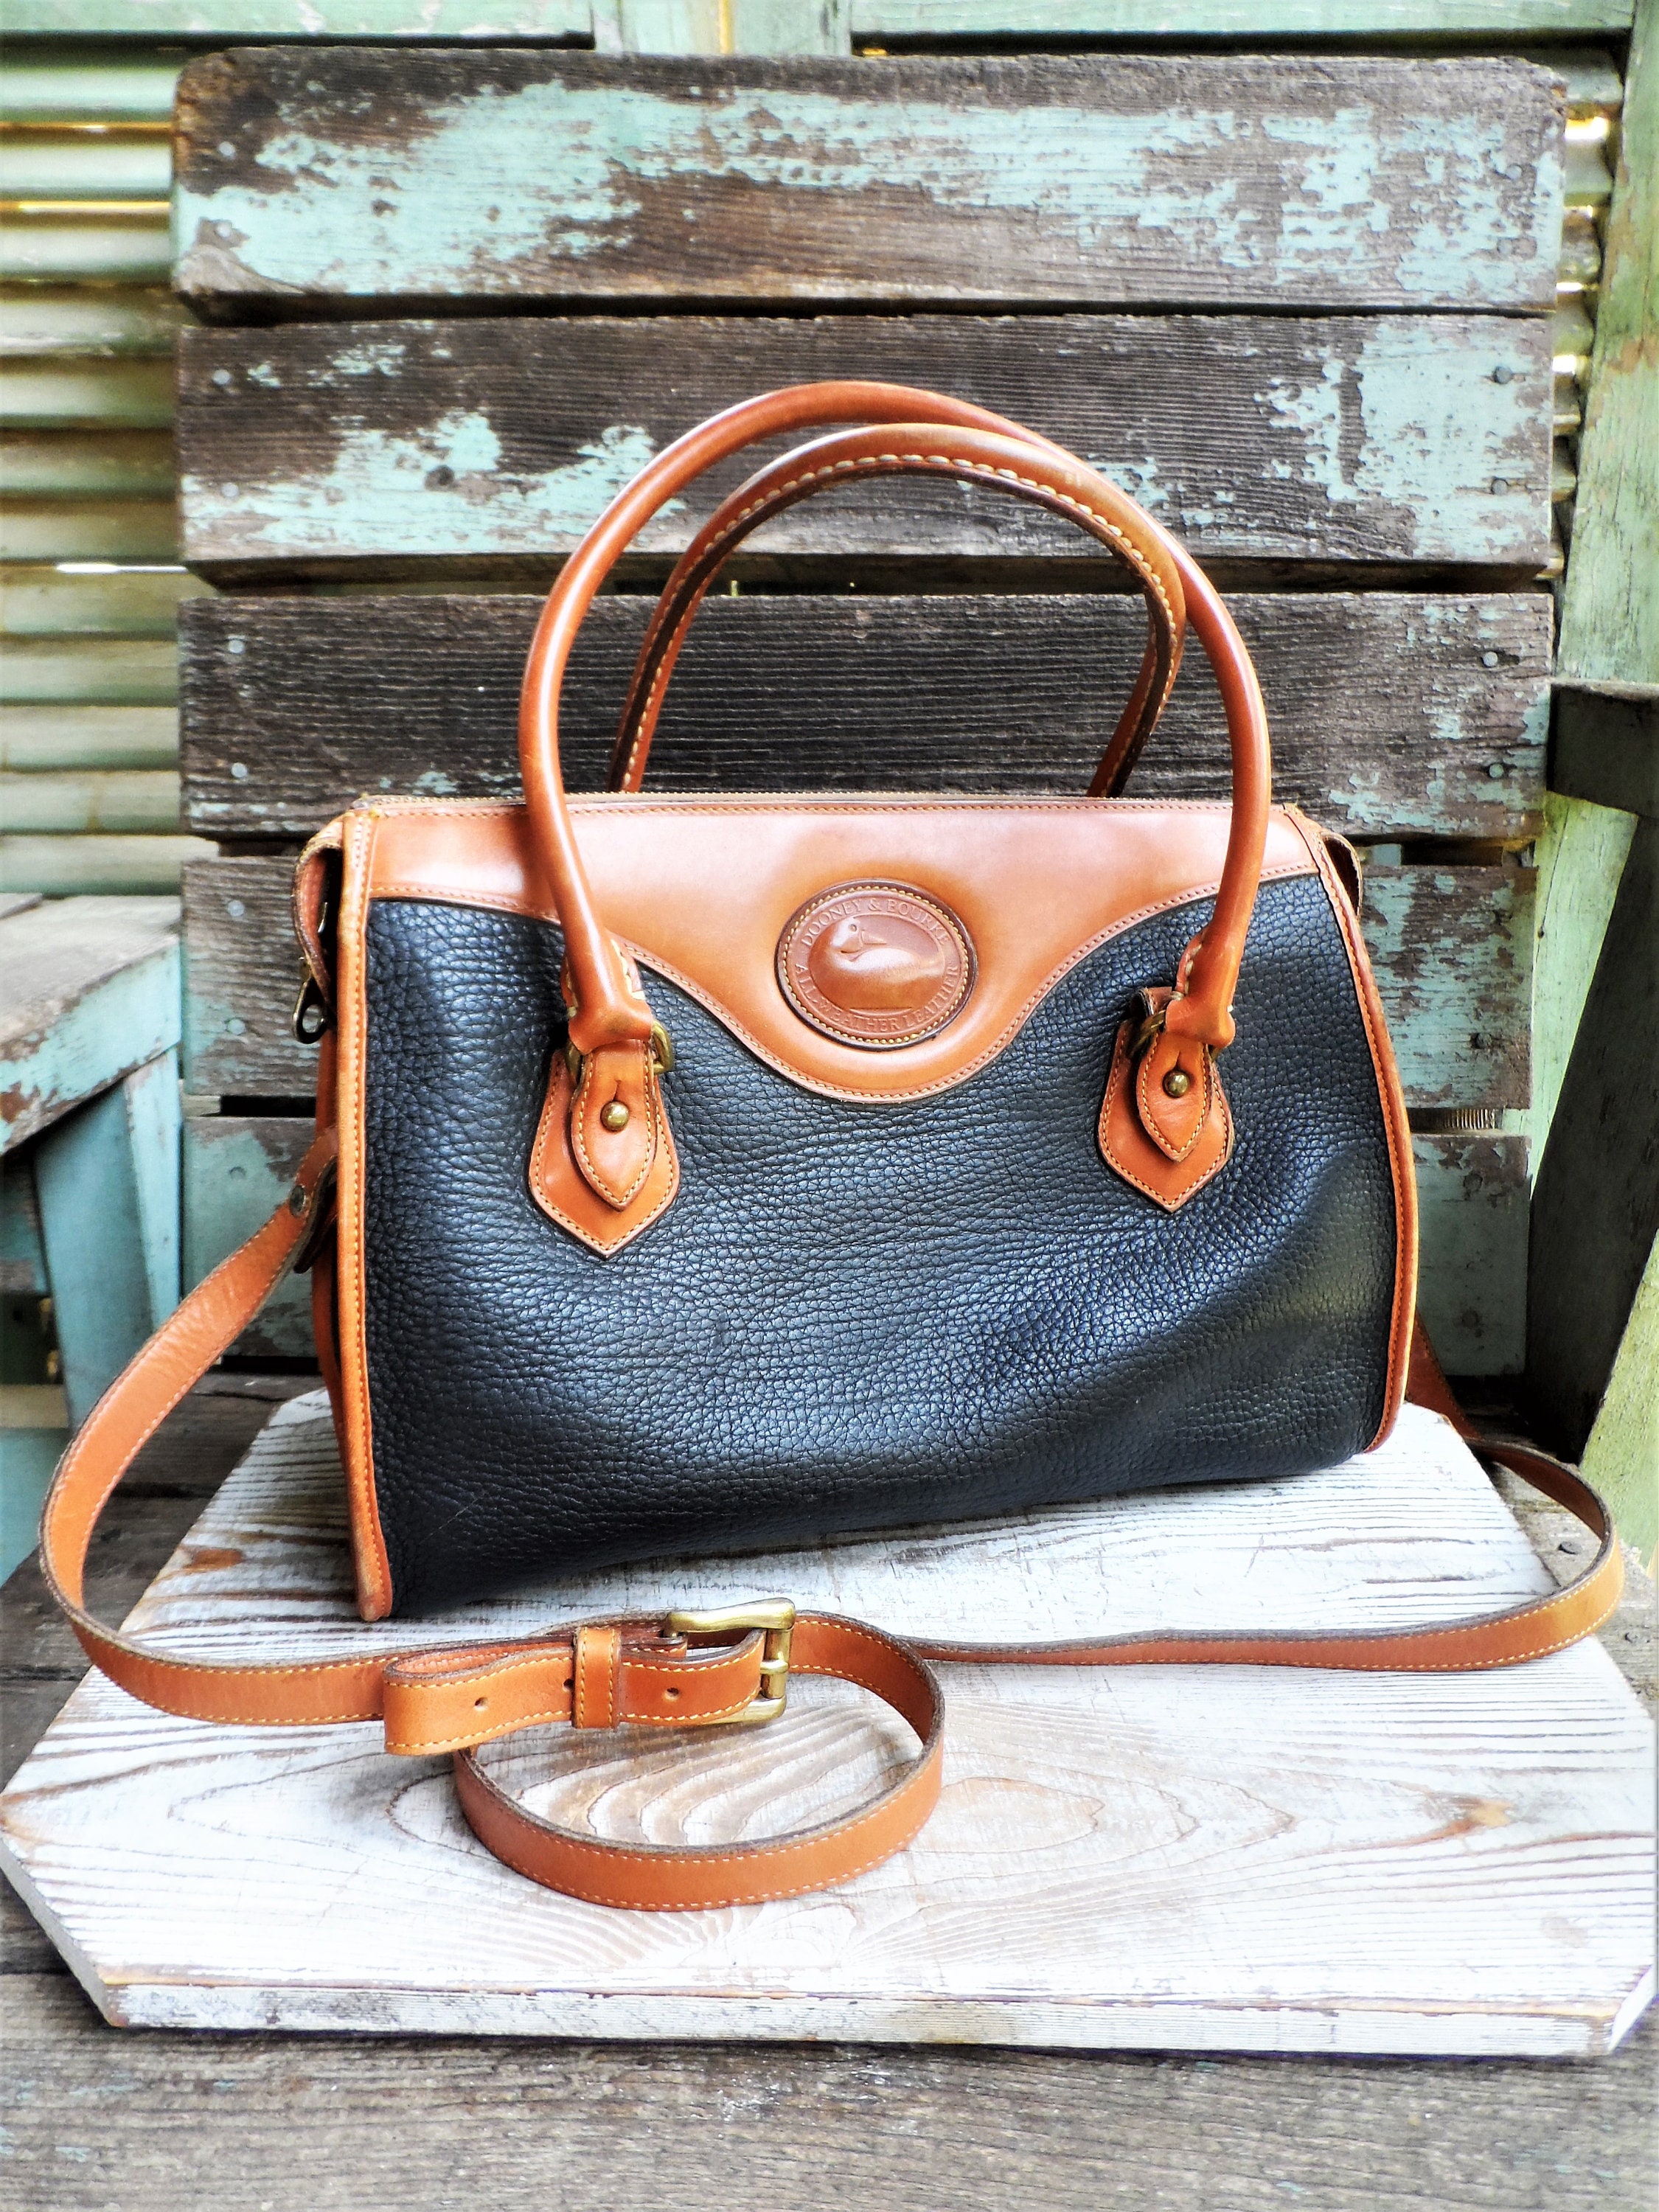 Vintage Dooney & Bourke All Weather Leather Handbags Made in USA, from the  1970s and 1980s